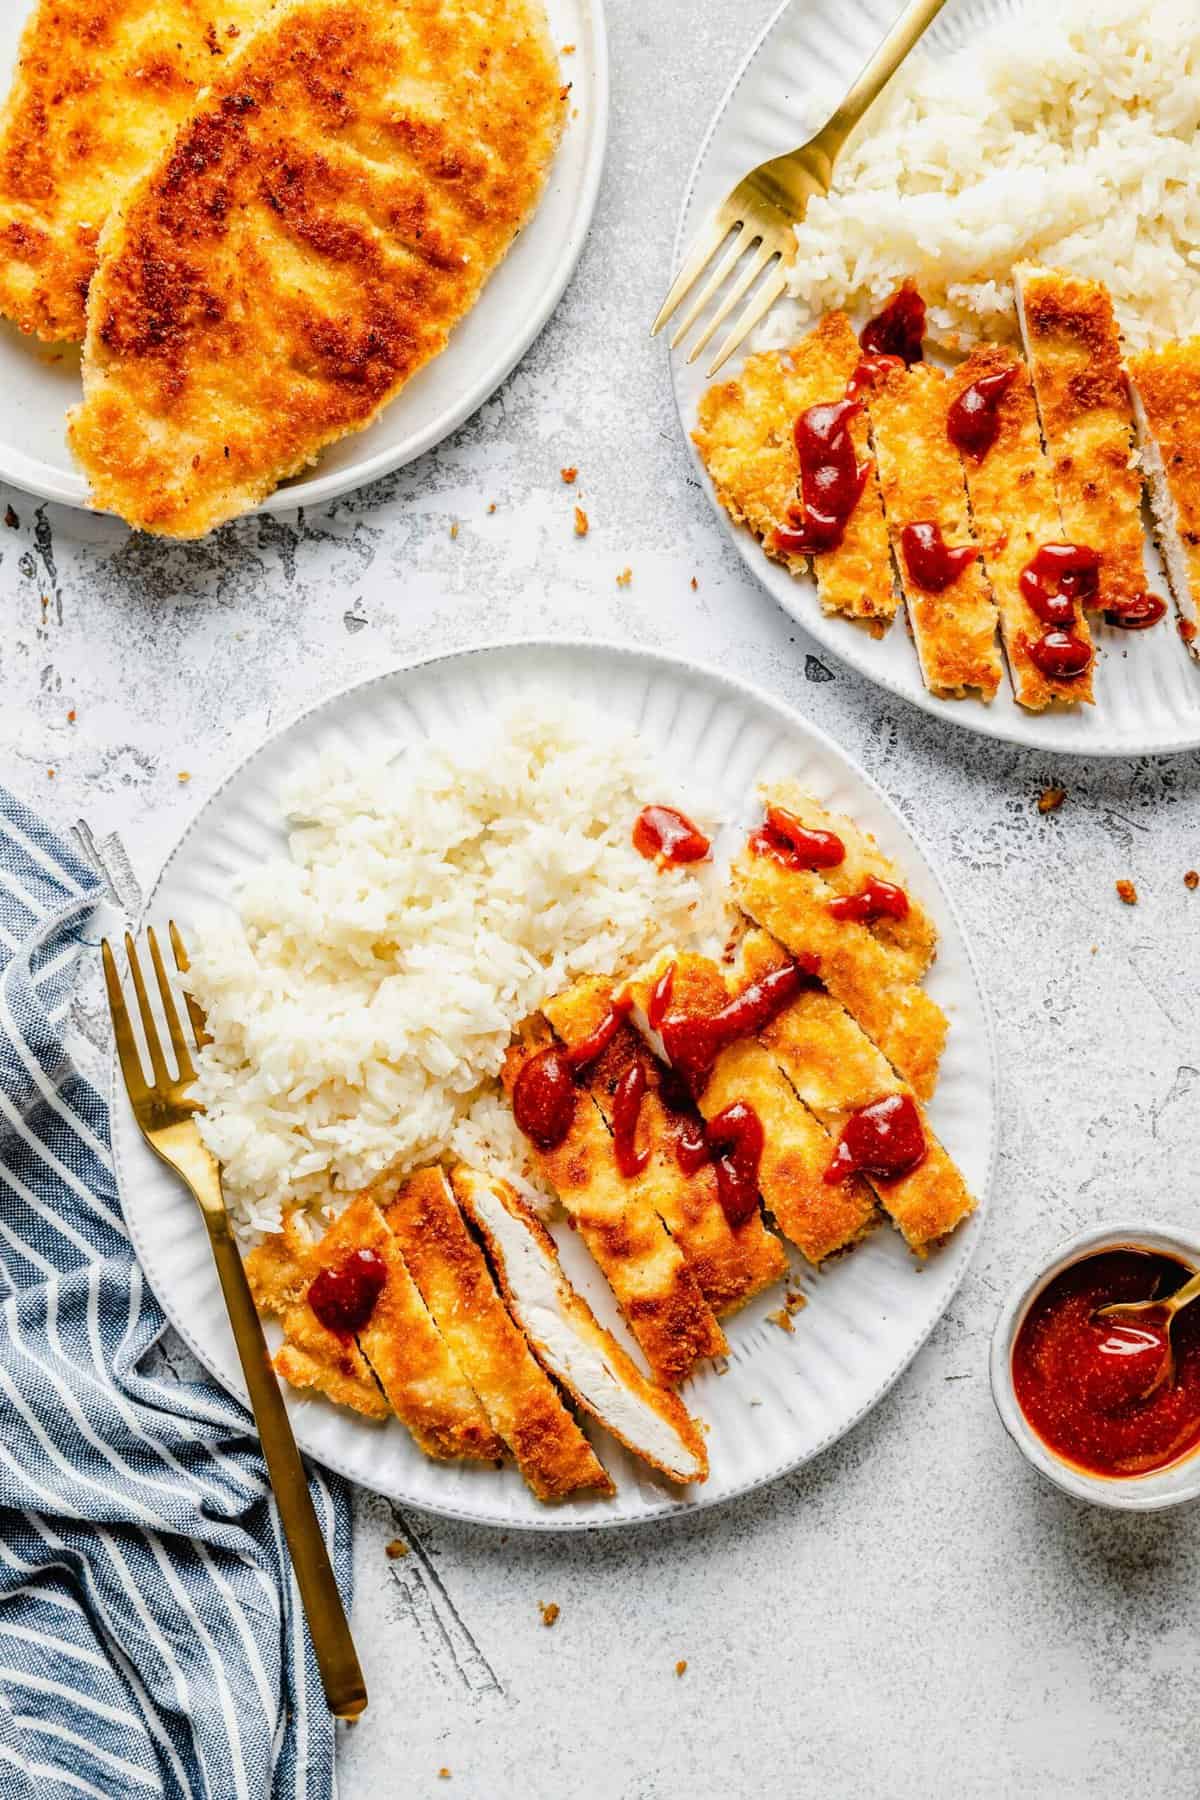 Overhead view of a plate with white rice and slices of chicken katsu topped with tonkatsu sauce, with a fork on the plate, next to another plate of chicken katsu and a serving bowl of sauce